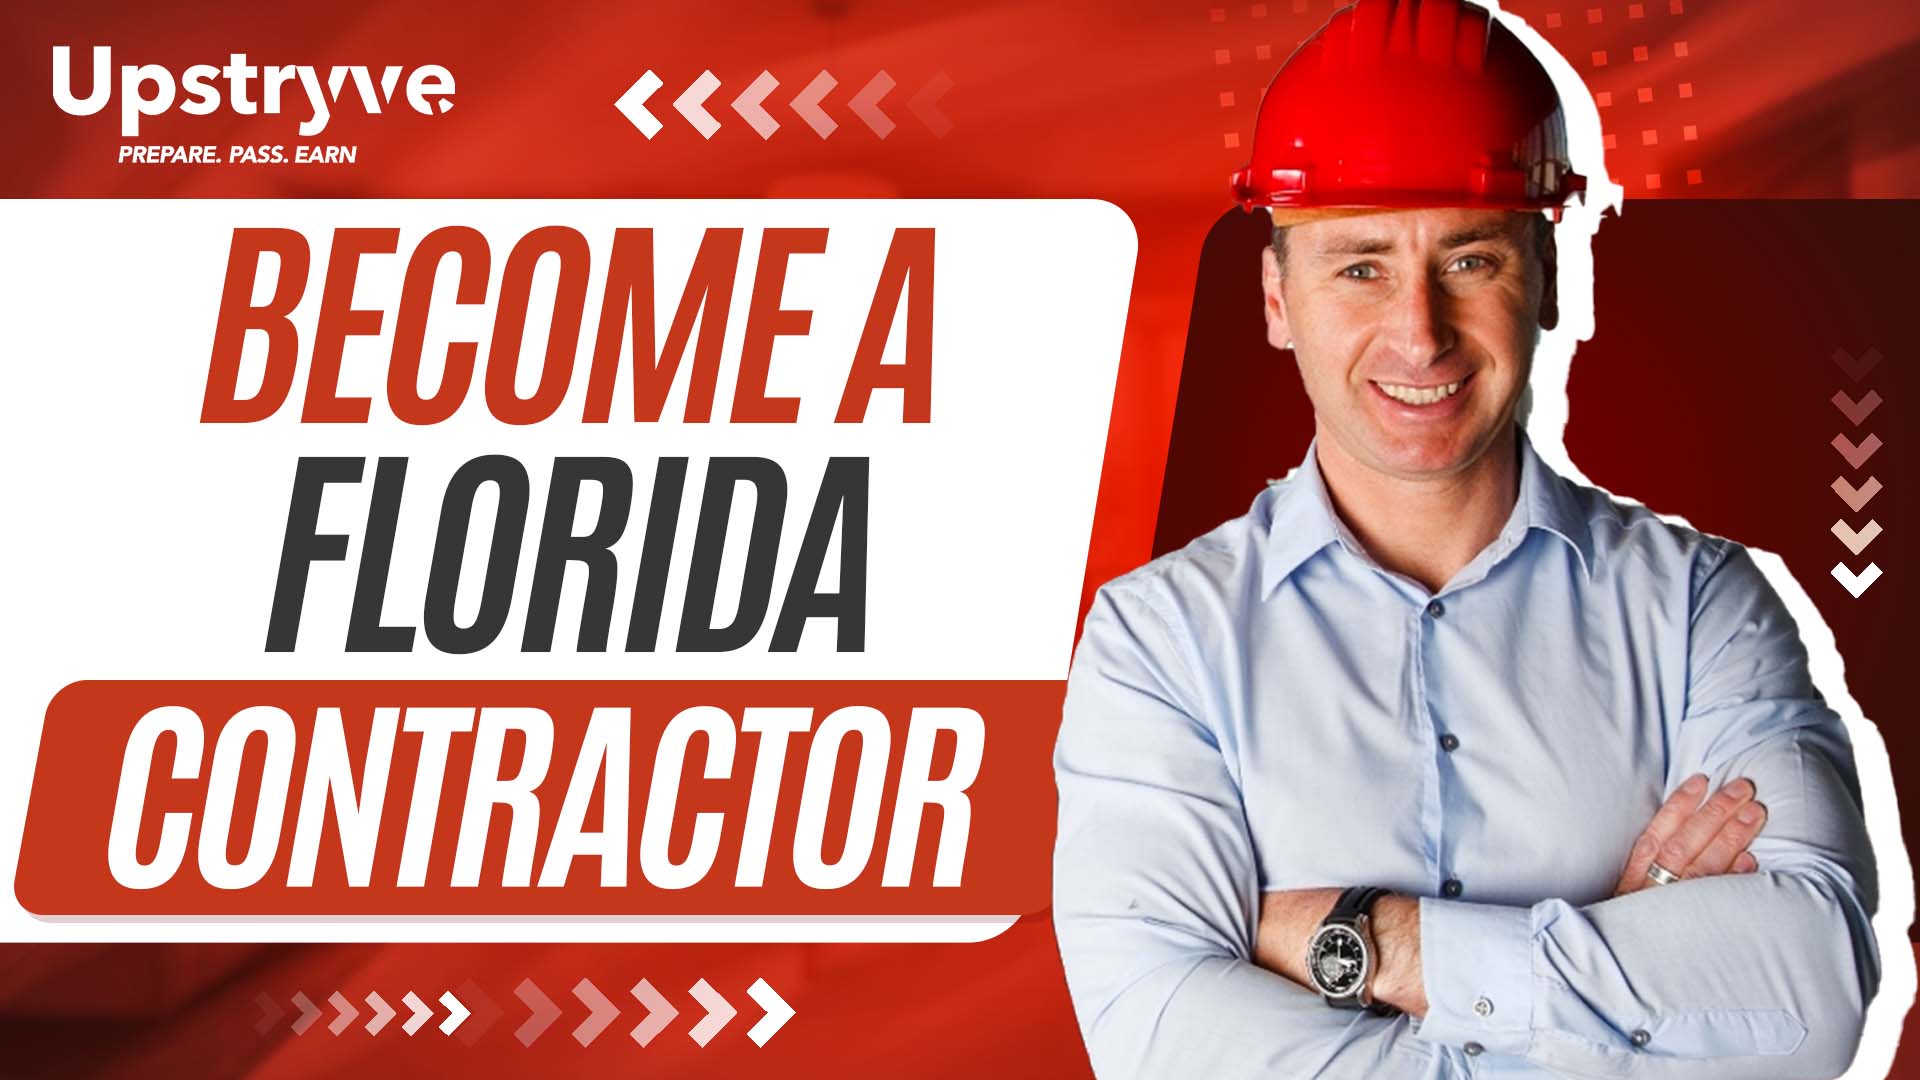 How to become a General Contractor in Florida - how to become a general contractor in florida | UpStryve

 How do I become a Florida General Contractor? This is a question we get here at Upstryve all the time. Each state is different and every situation is different as well. This is why we have licensing expert J.D Myers join us today to go over 4 key steps to becoming a Florida General Contractor.

If you want to become a Contractor in the state of Florida give us a call at 877-938-1888 and we will help guide you in the right direction to make the process more efficient and cost effective. 

Contact JD: jd.myers@upstryve.com
Call: 877-938-1888
Chat with J.D: https://direct.lc.chat/12628716/